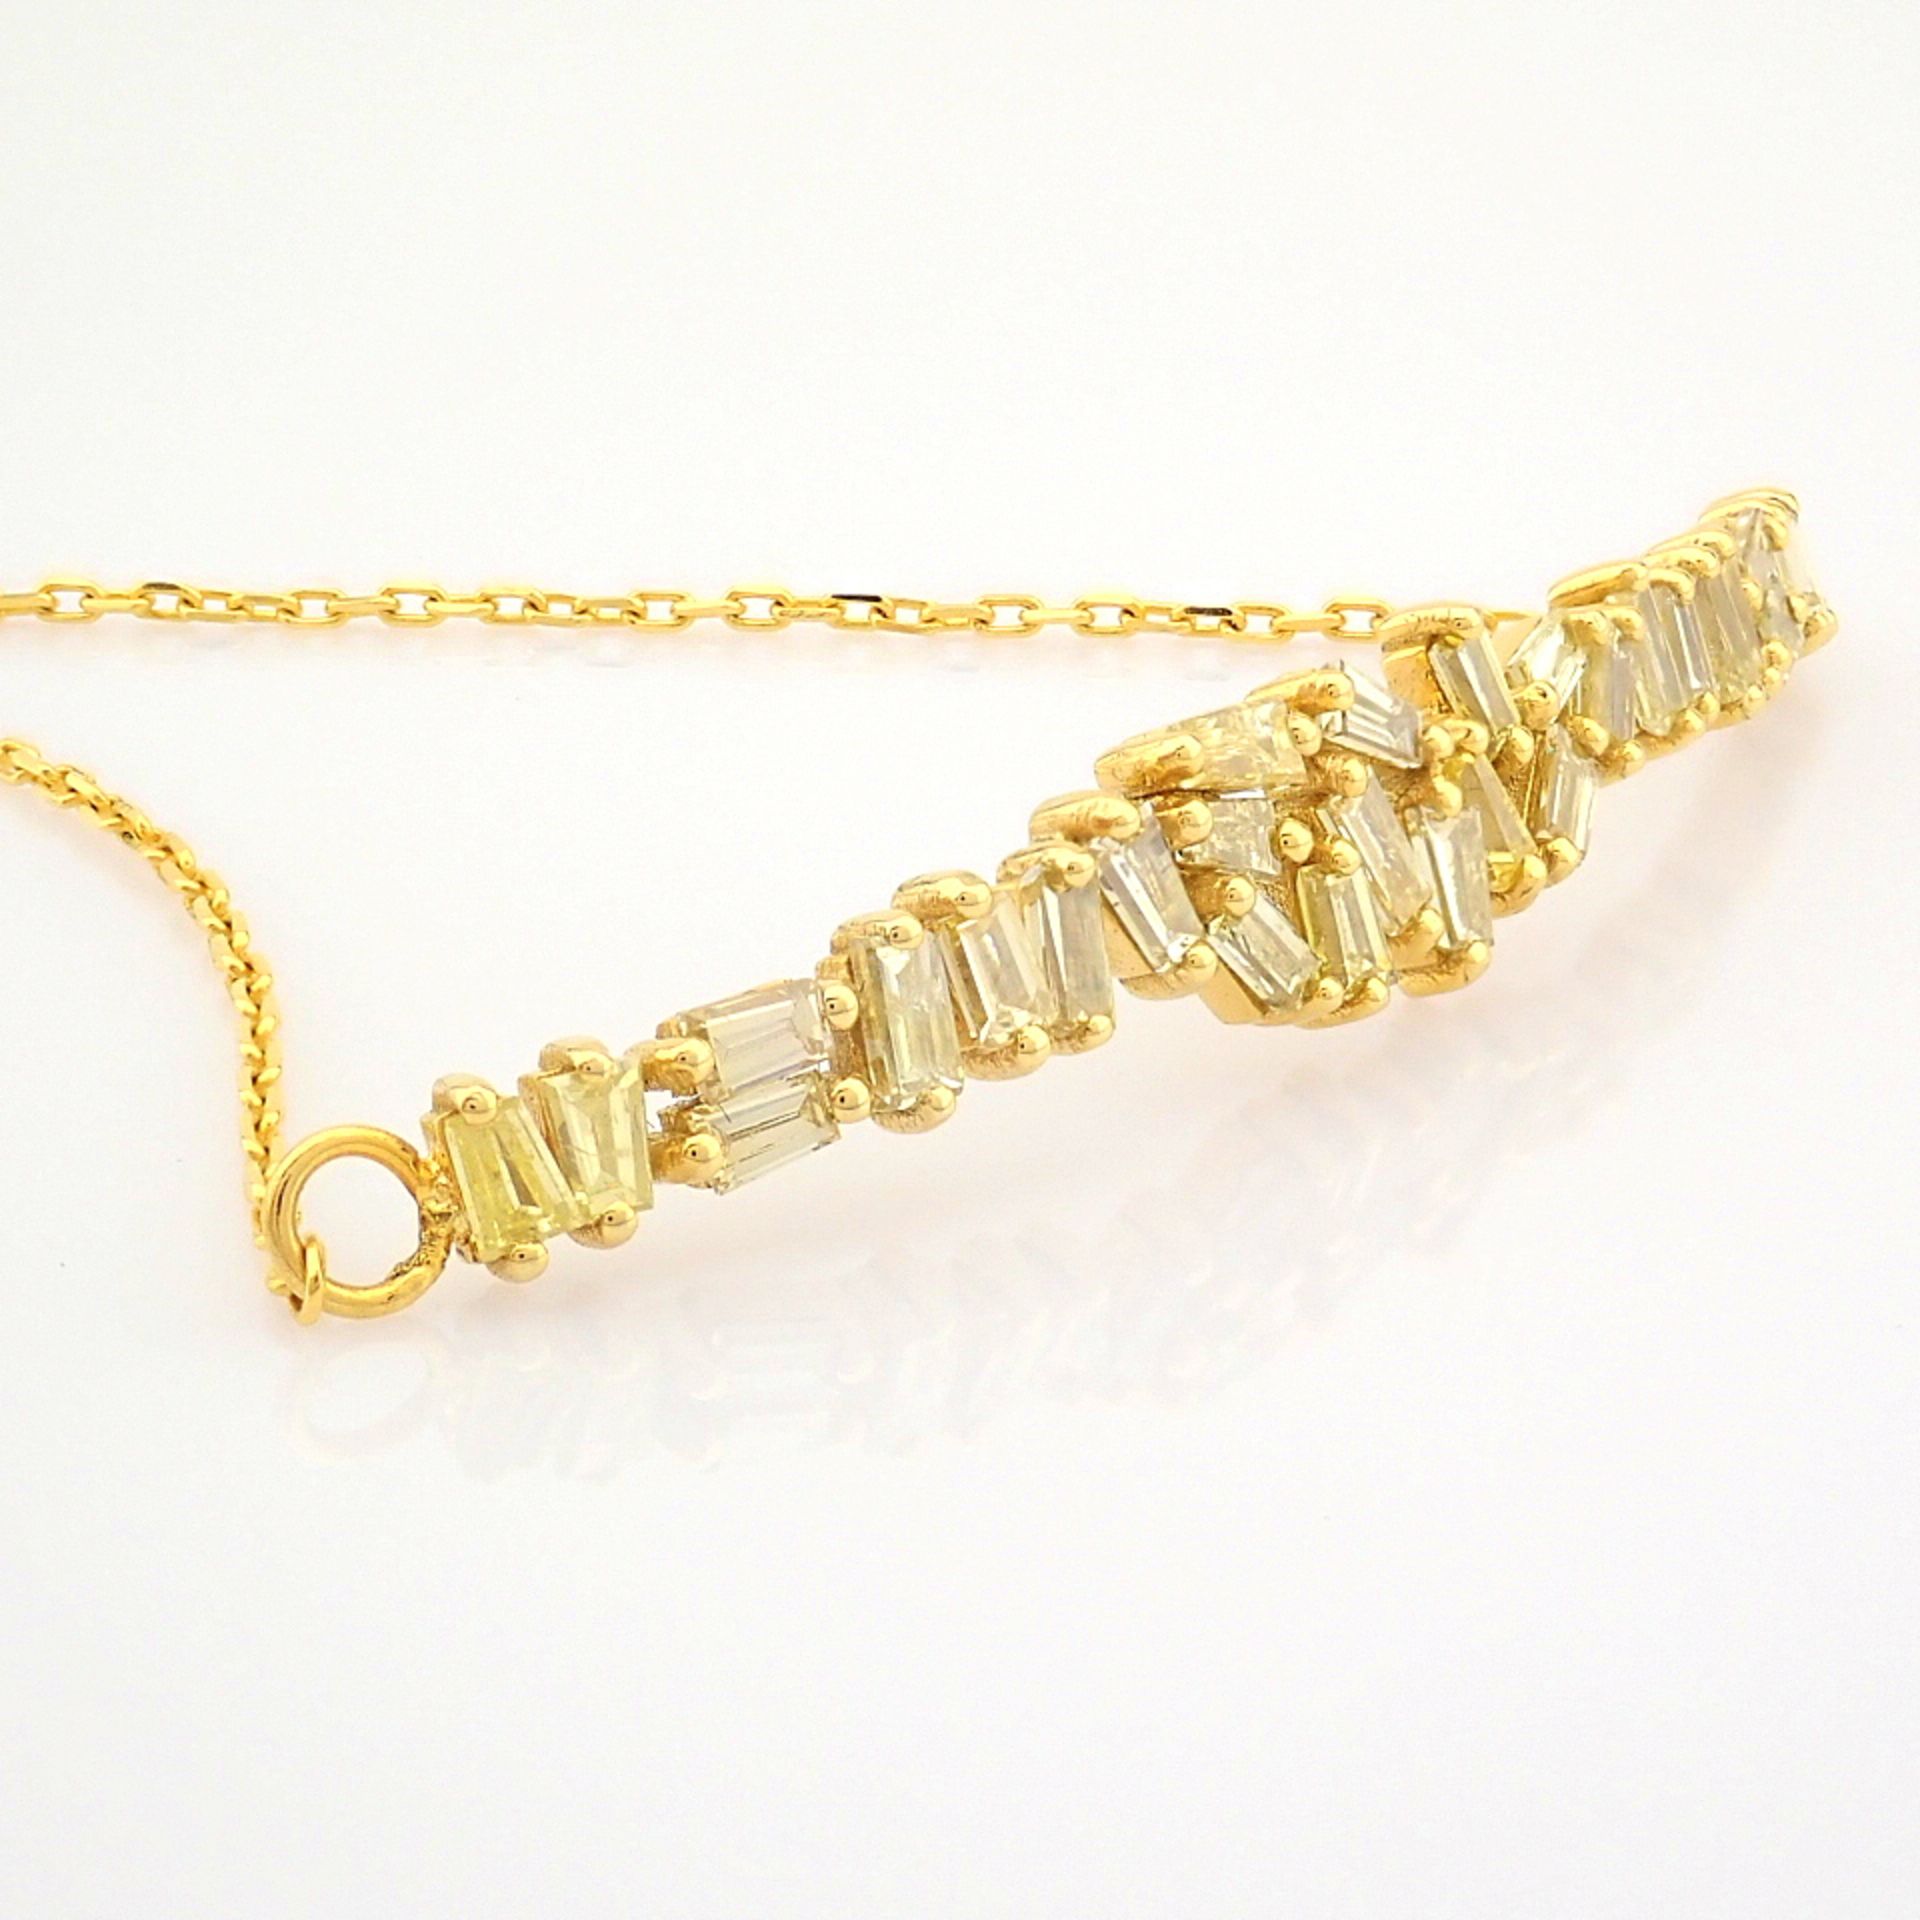 Certificated 14K Yellow Gold Fancy Diamond Bracelet (Total 0.84 ct Stone) - Image 3 of 7